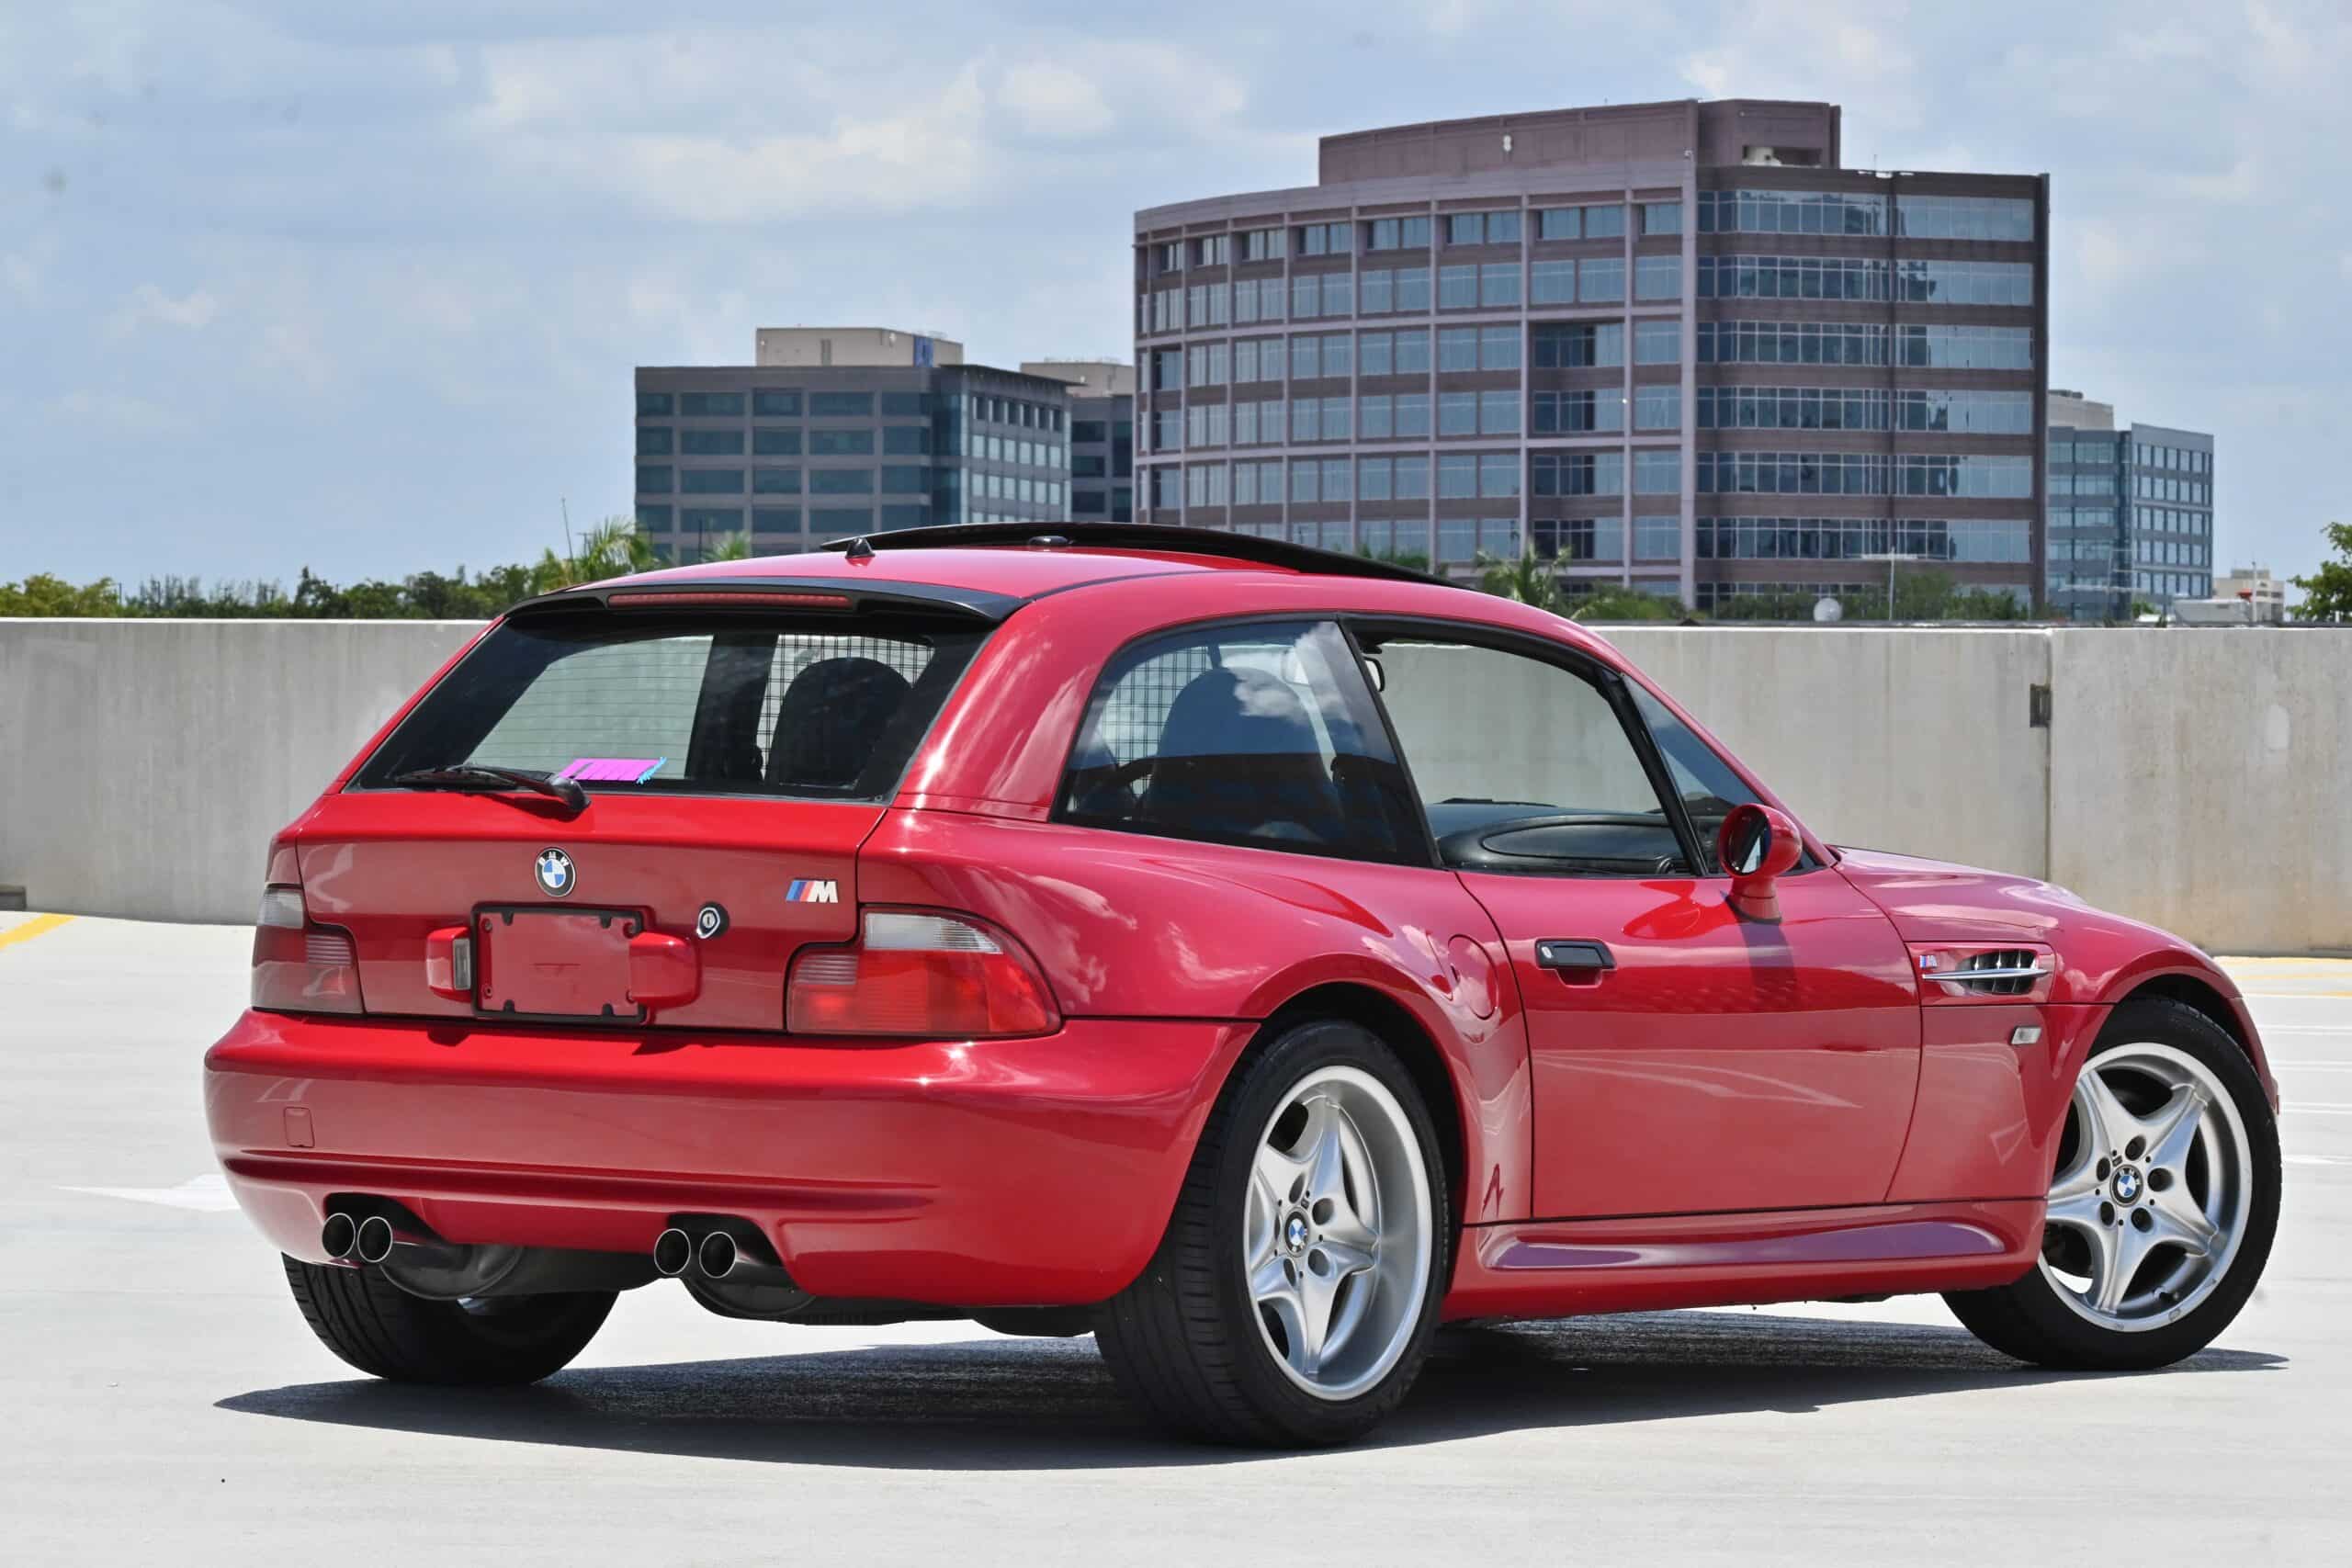 2000 BMW Z3 M Coupe 1 of 183 Imola Red/ Black Z3M Coupes – Clean history – Freshly Serviced